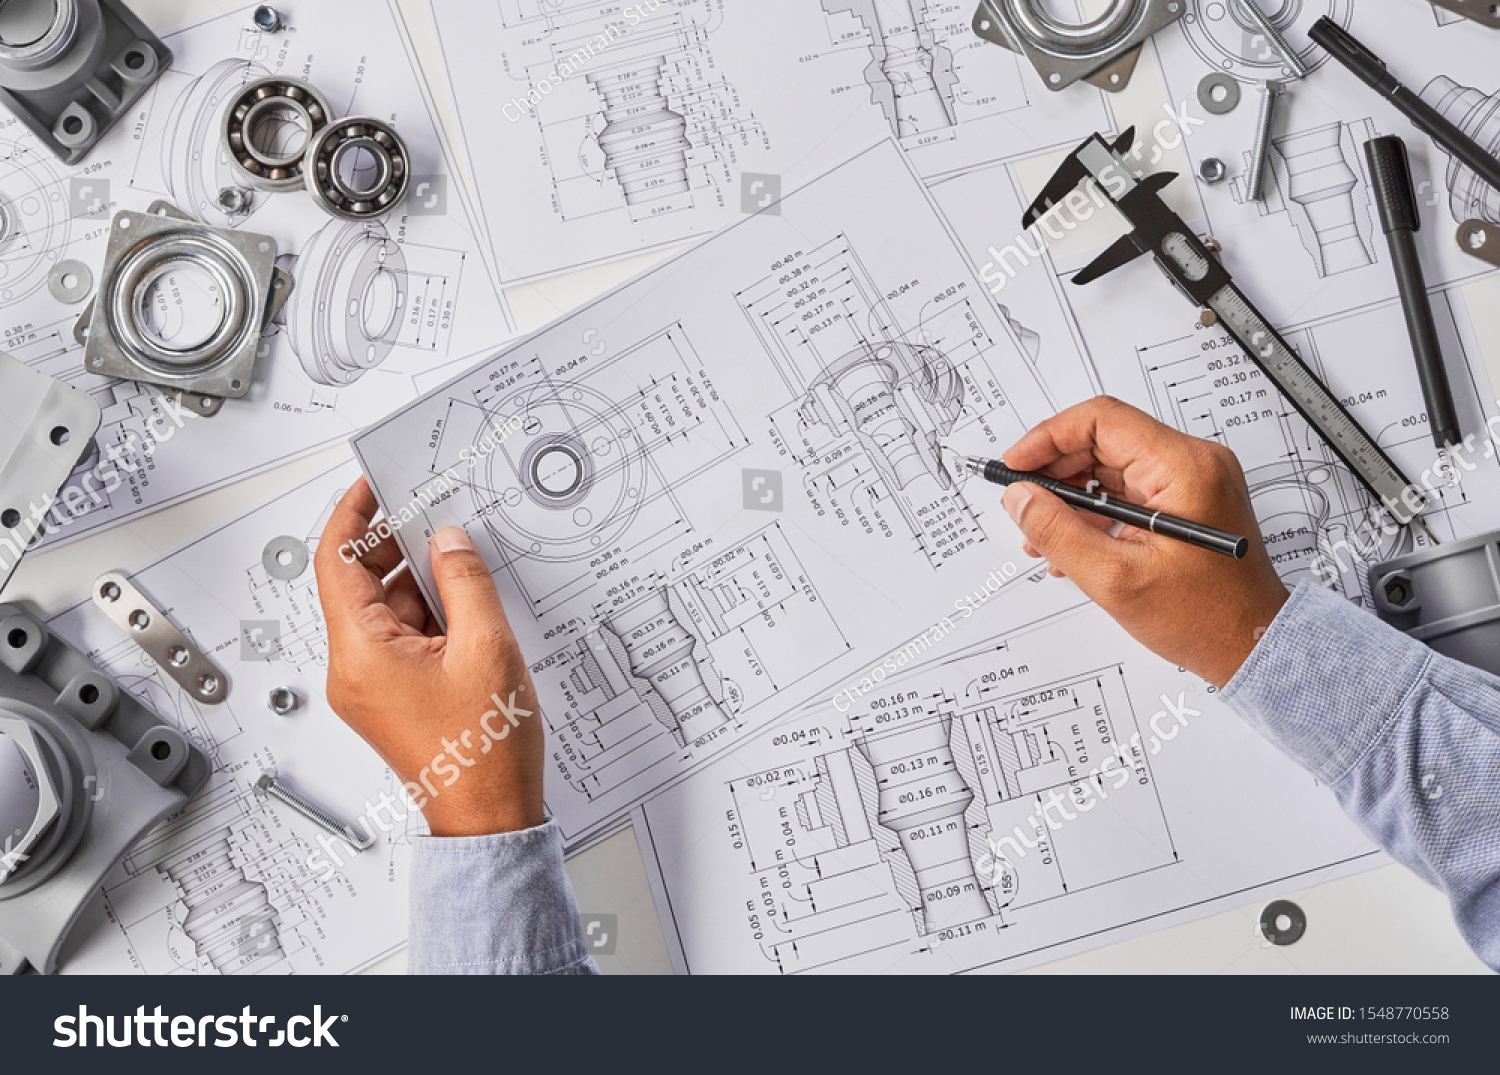 Engineer technician designing drawings mechanical parts engineering Engine
manufacturing factory Industry Industrial work project blueprints measuring bearings caliper tools                            #1548770558